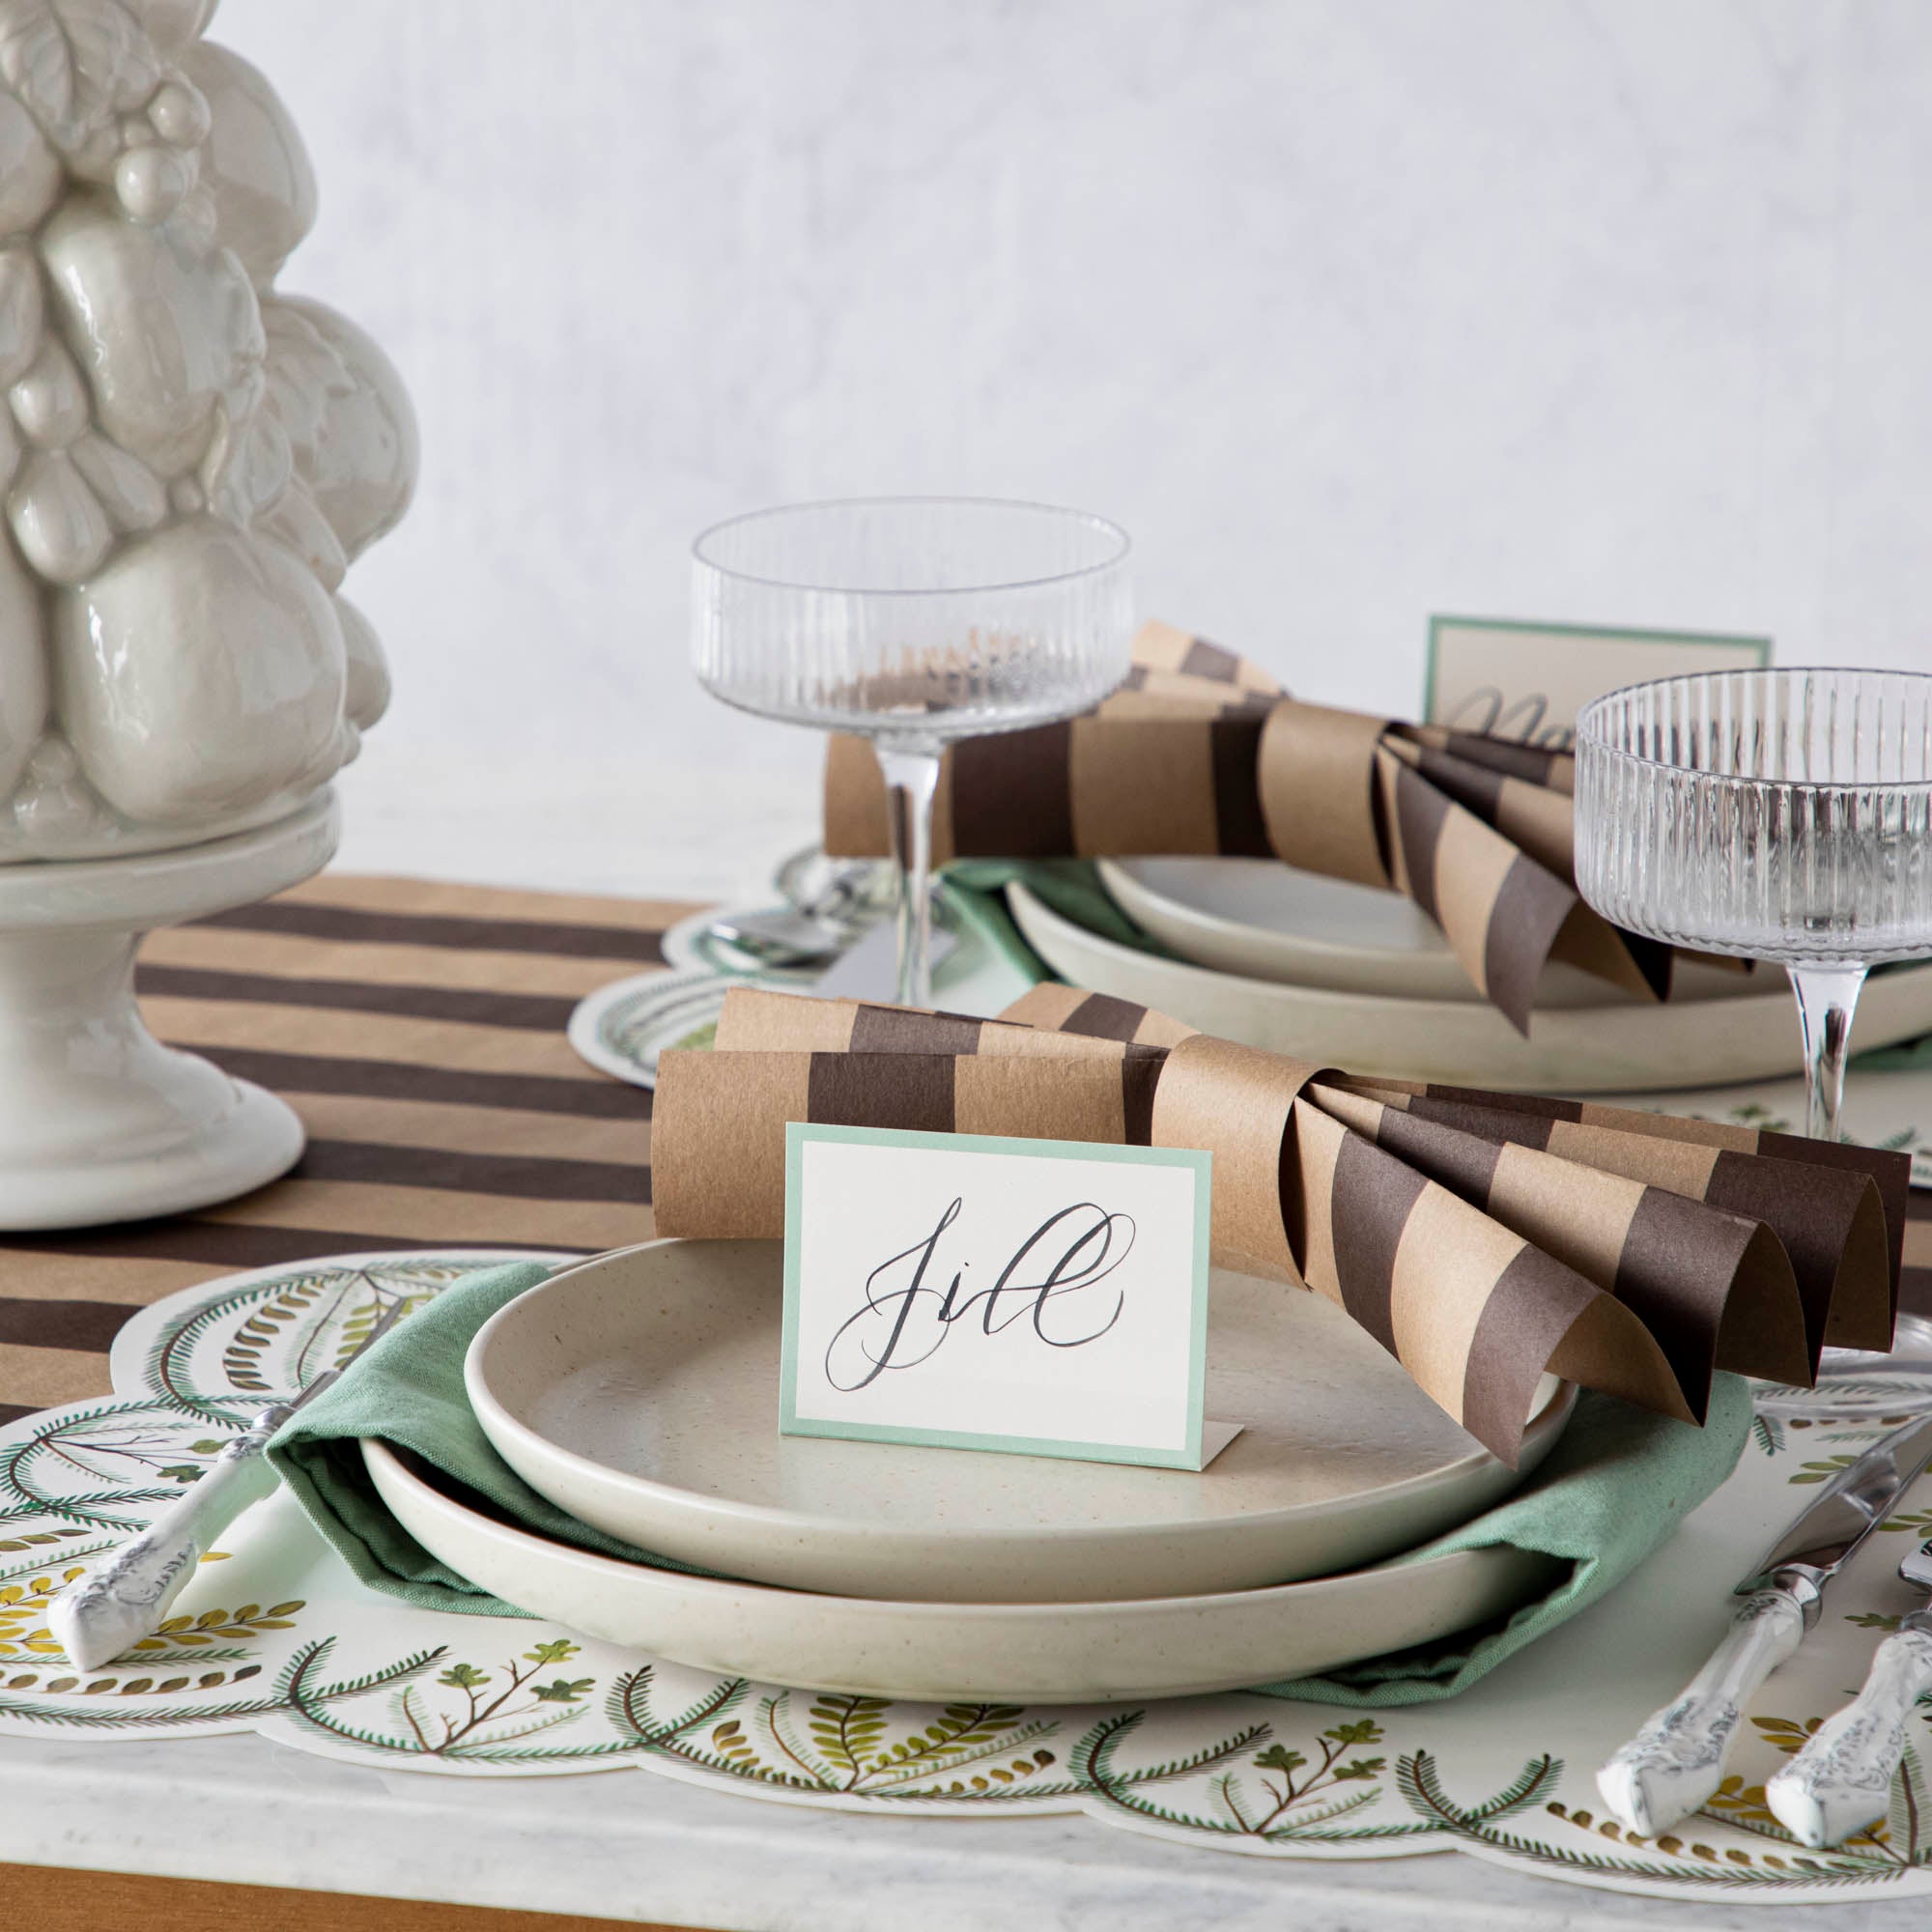 The Kraft Brown Classic Stripe Runner under an elegant table setting, plates adorned with crafted bows made from cut pieces of the runner.